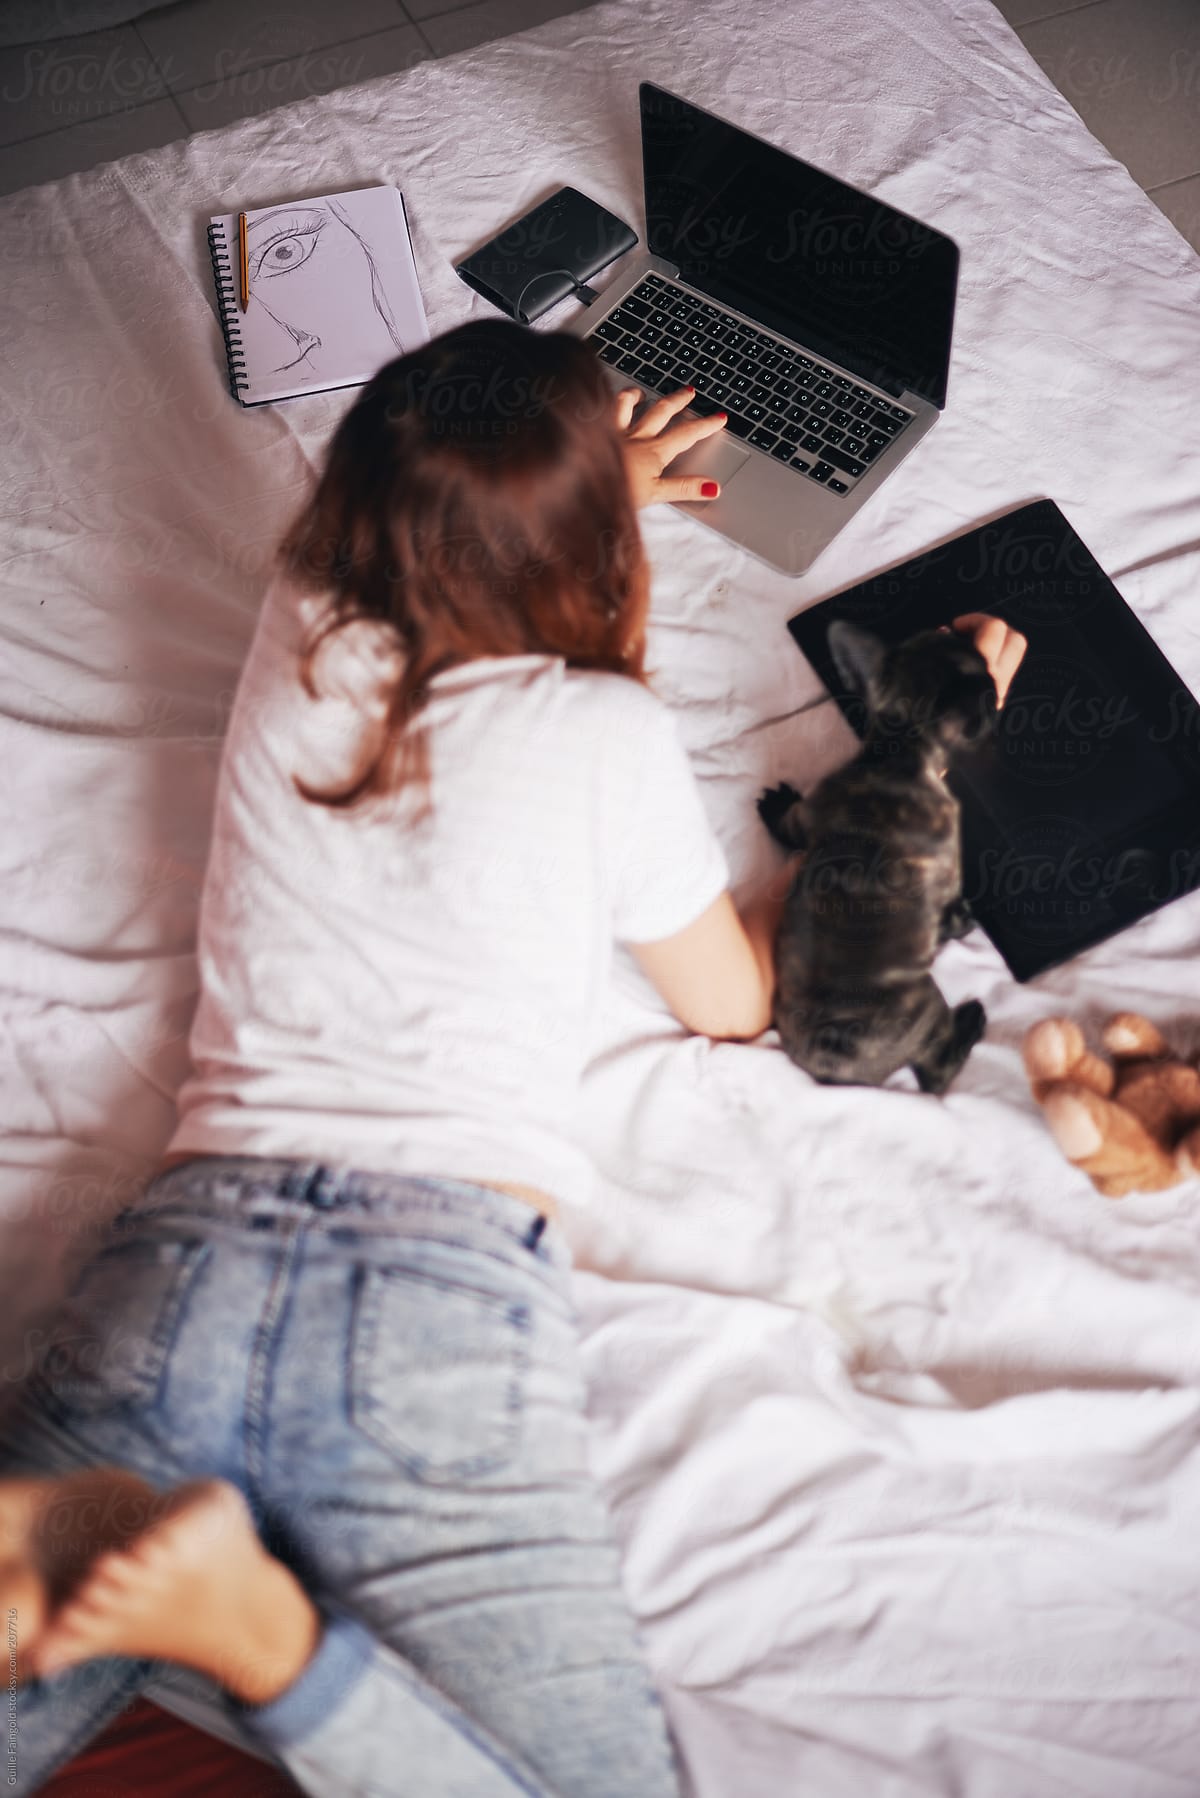 Girl typing on laptop and playing with puppy on bed